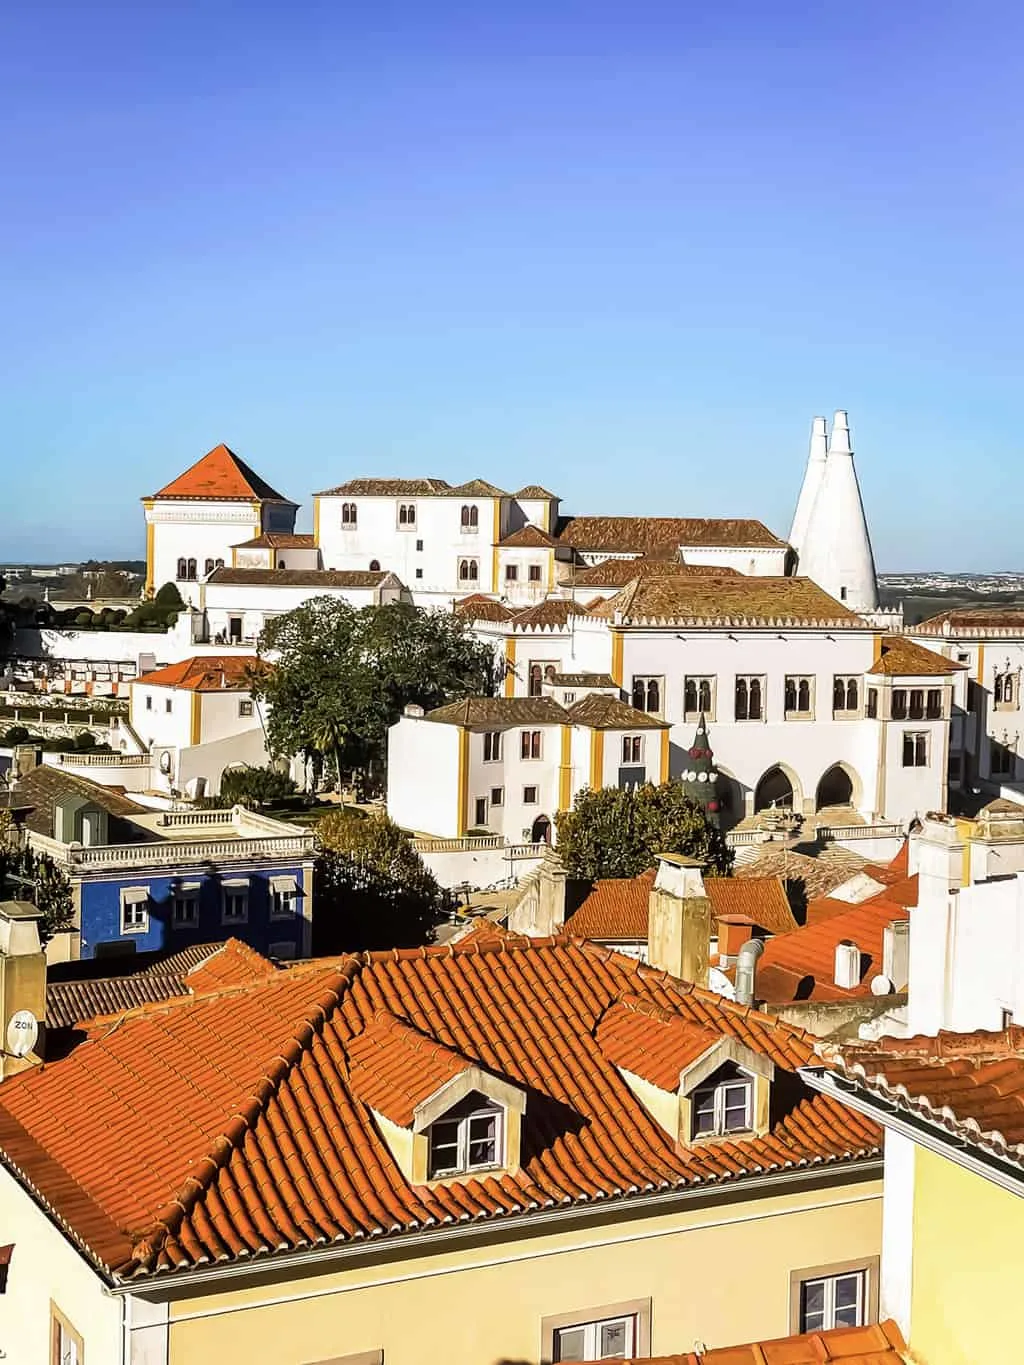 Views over the red roof tops in Sintra Portugal towards the National palace of Sintra with the striking white cone towers. 